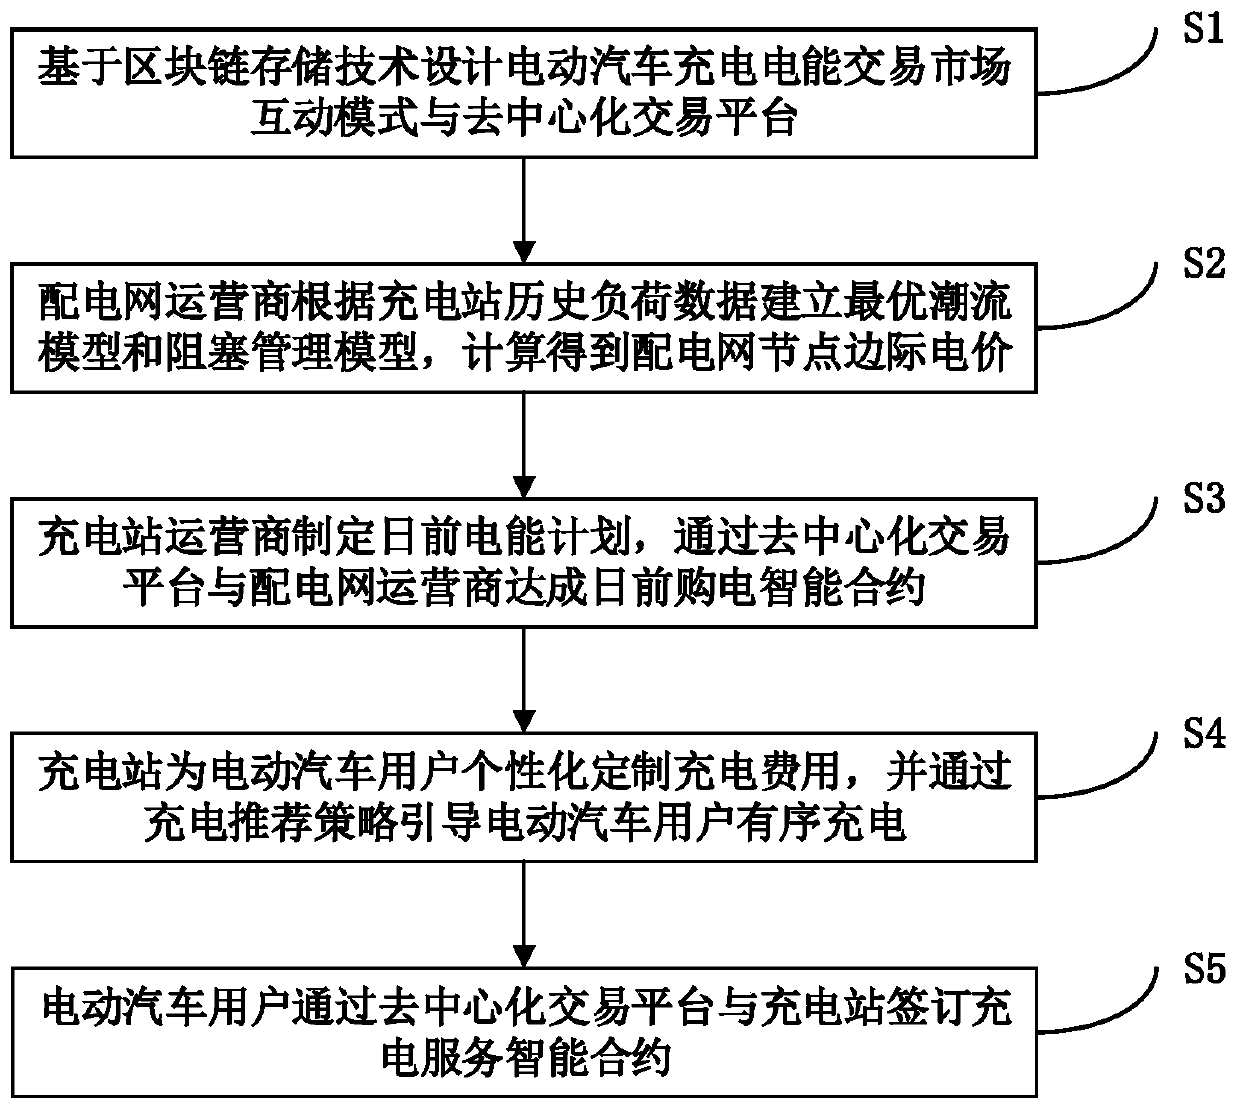 Electric vehicle charging electric energy transaction method based on block chain technology